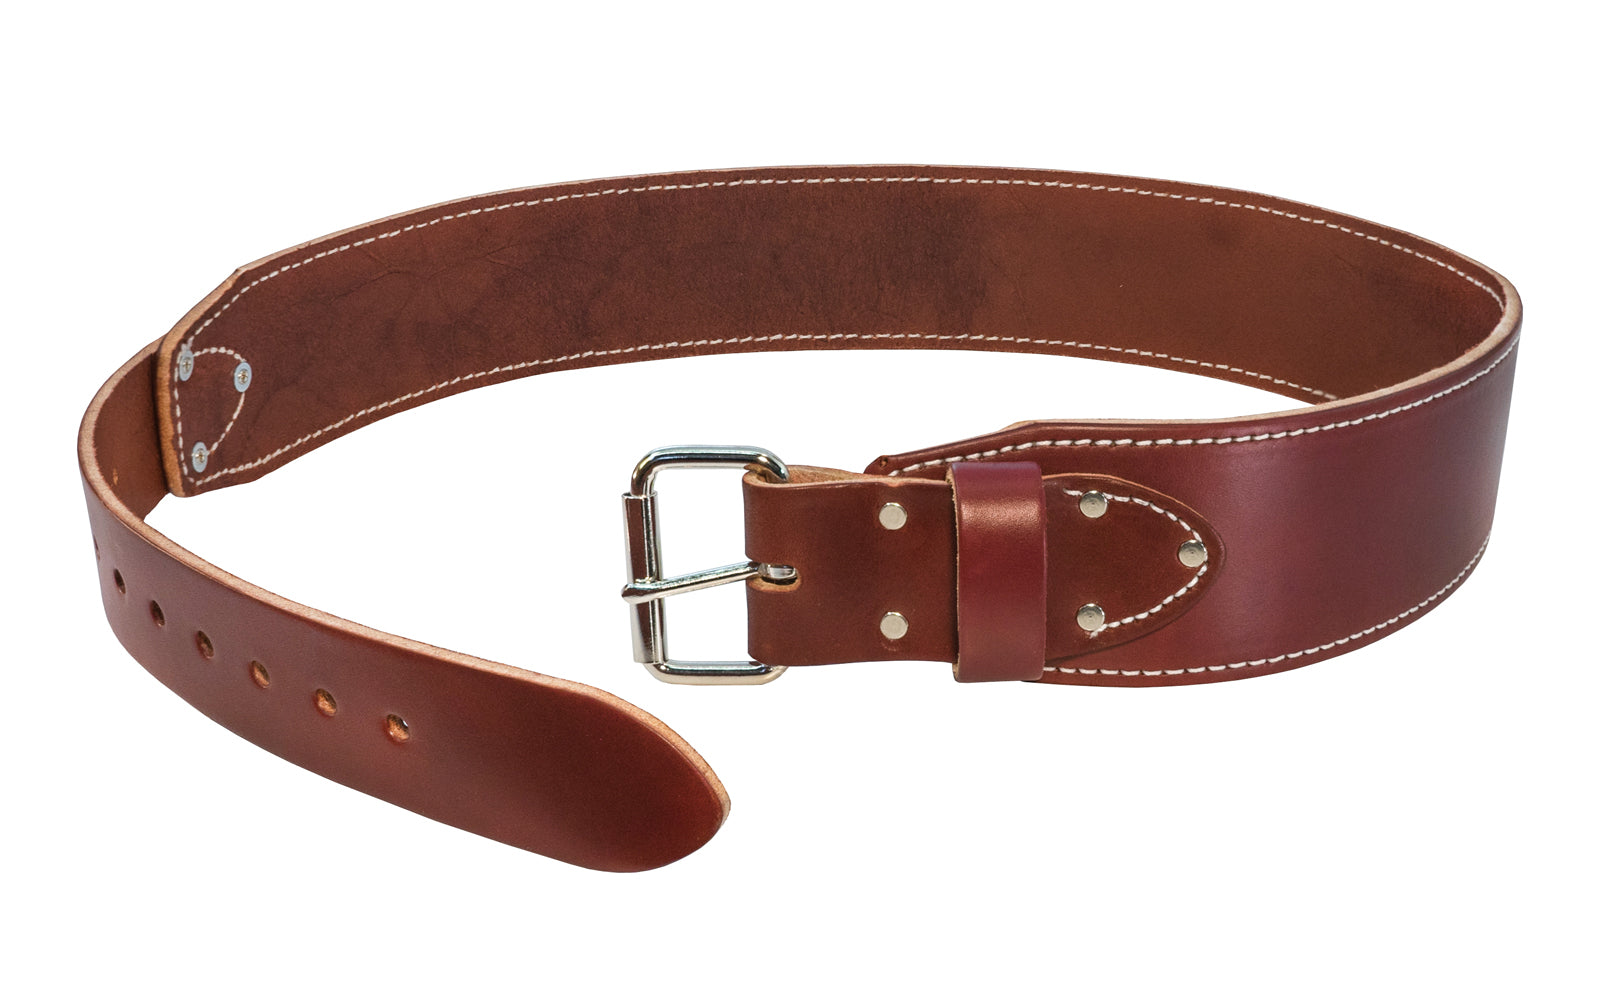 Occidental Leather XXXL HD Ranger Work Belt ~ Model 5035XXXL - Made of genuine leather - Made in USA  - 759244089103 - XXXL Occidental Belt - Leather Work Belt - 3" wide - Large Buckle - Quality 12-14 oz bridle leather - Edge stitched for quality, appearance & strength - 5035 XXXL - 53" Mid range - 61-1/2" Length